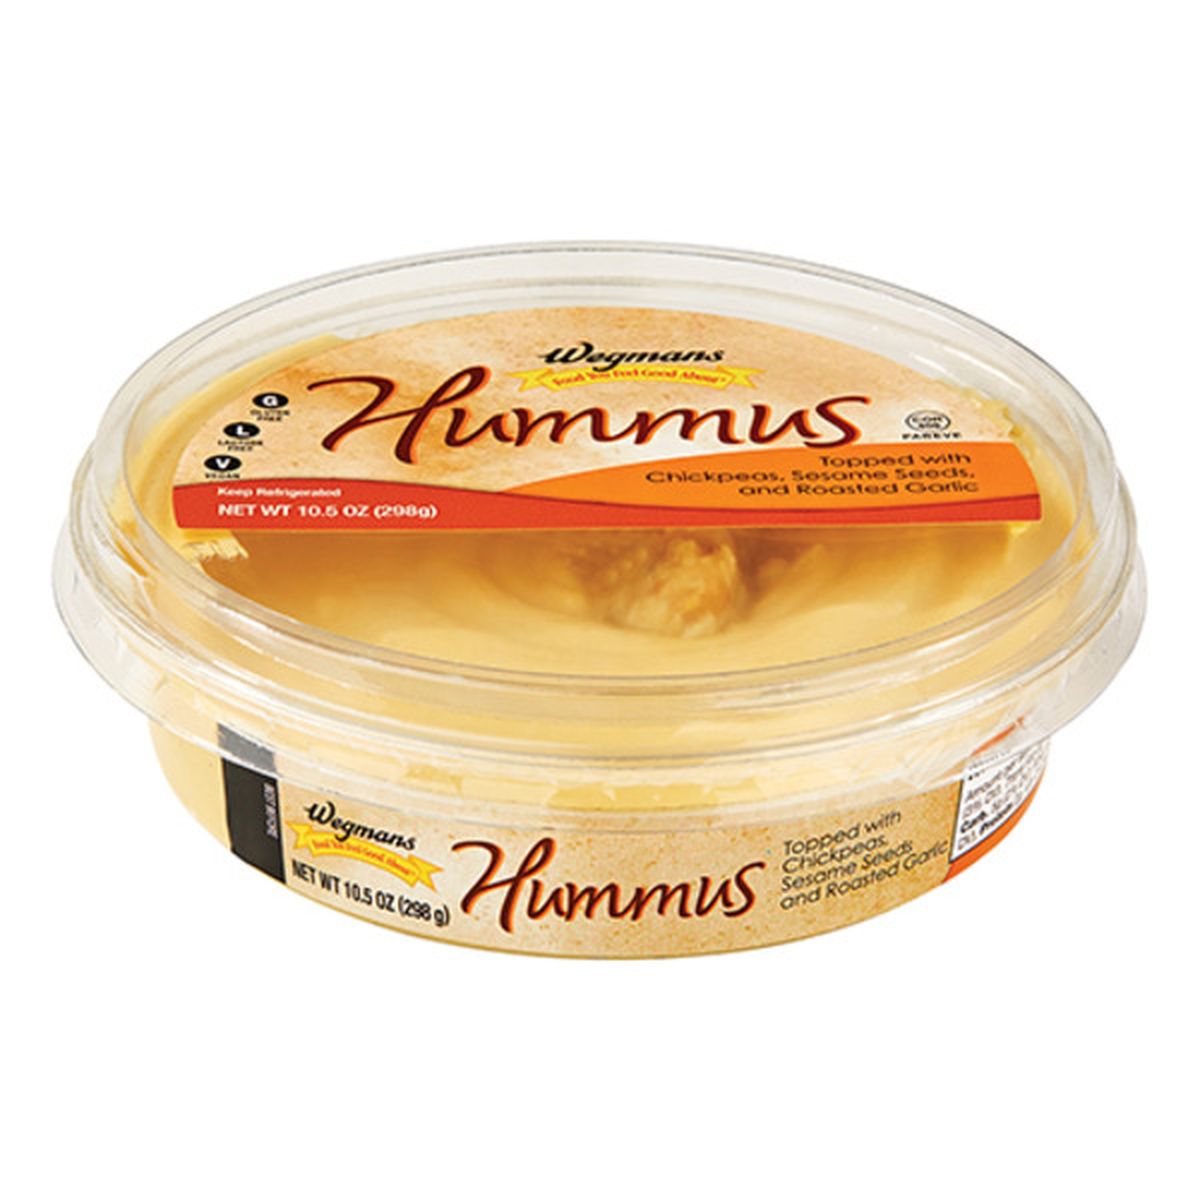 Calories in Wegmans Hummus Topped with Chickpeas, Sesame Seeds, and Roasted Garlic